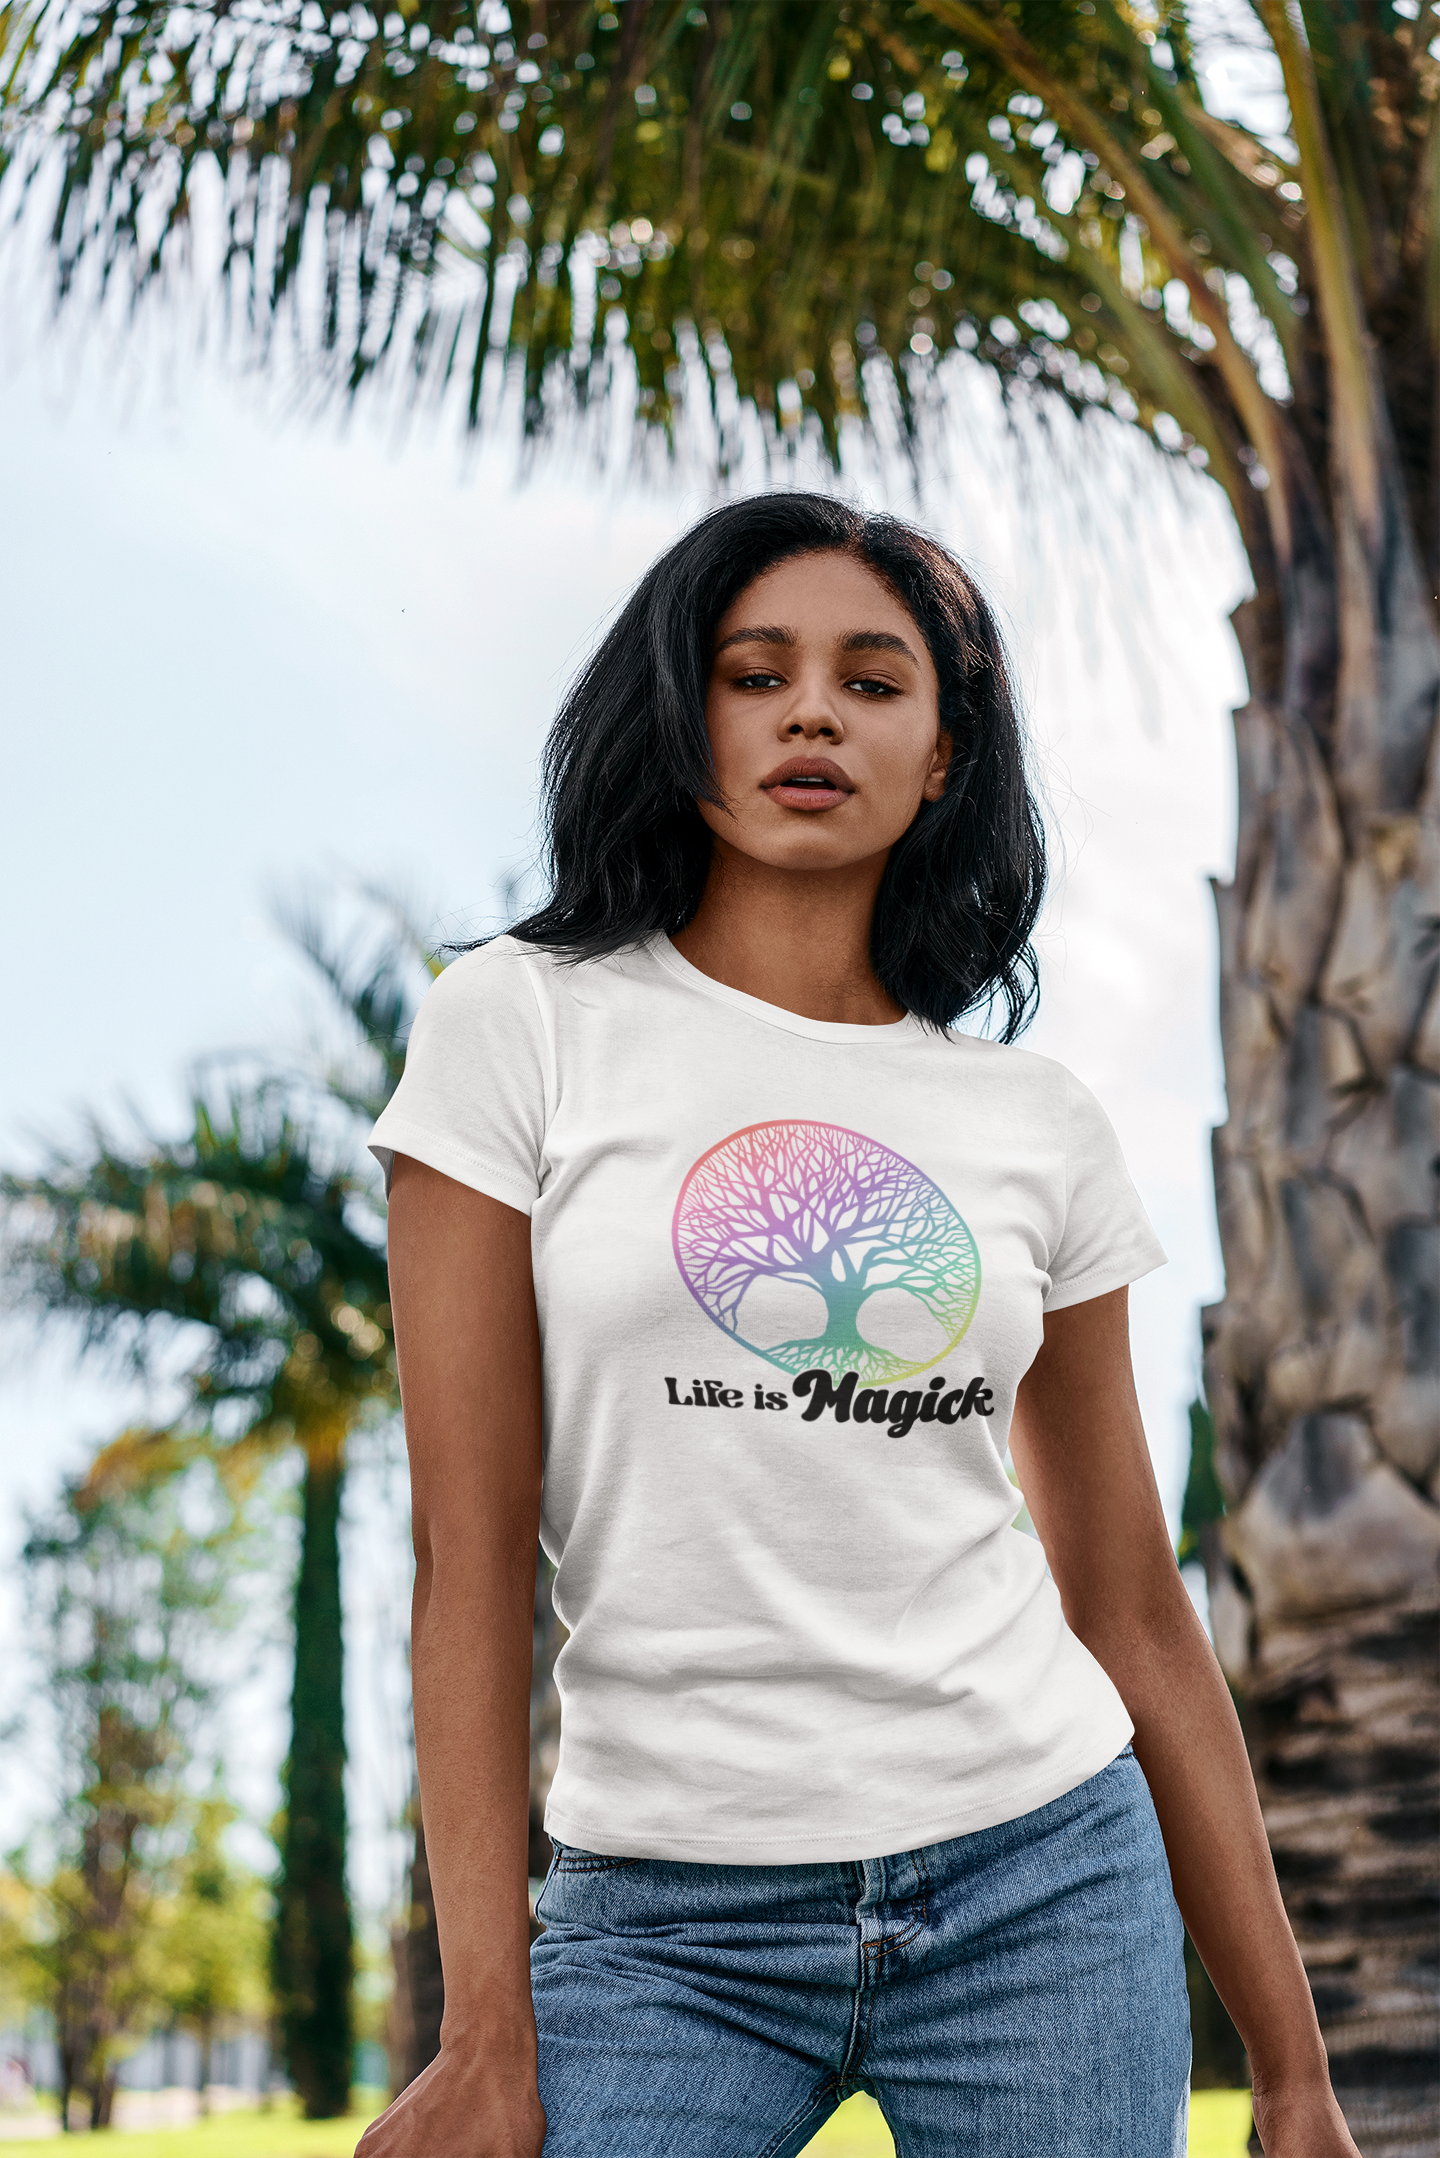 Life is Magick - The Tree of Life : Women's 100% Cotton T-Shirt